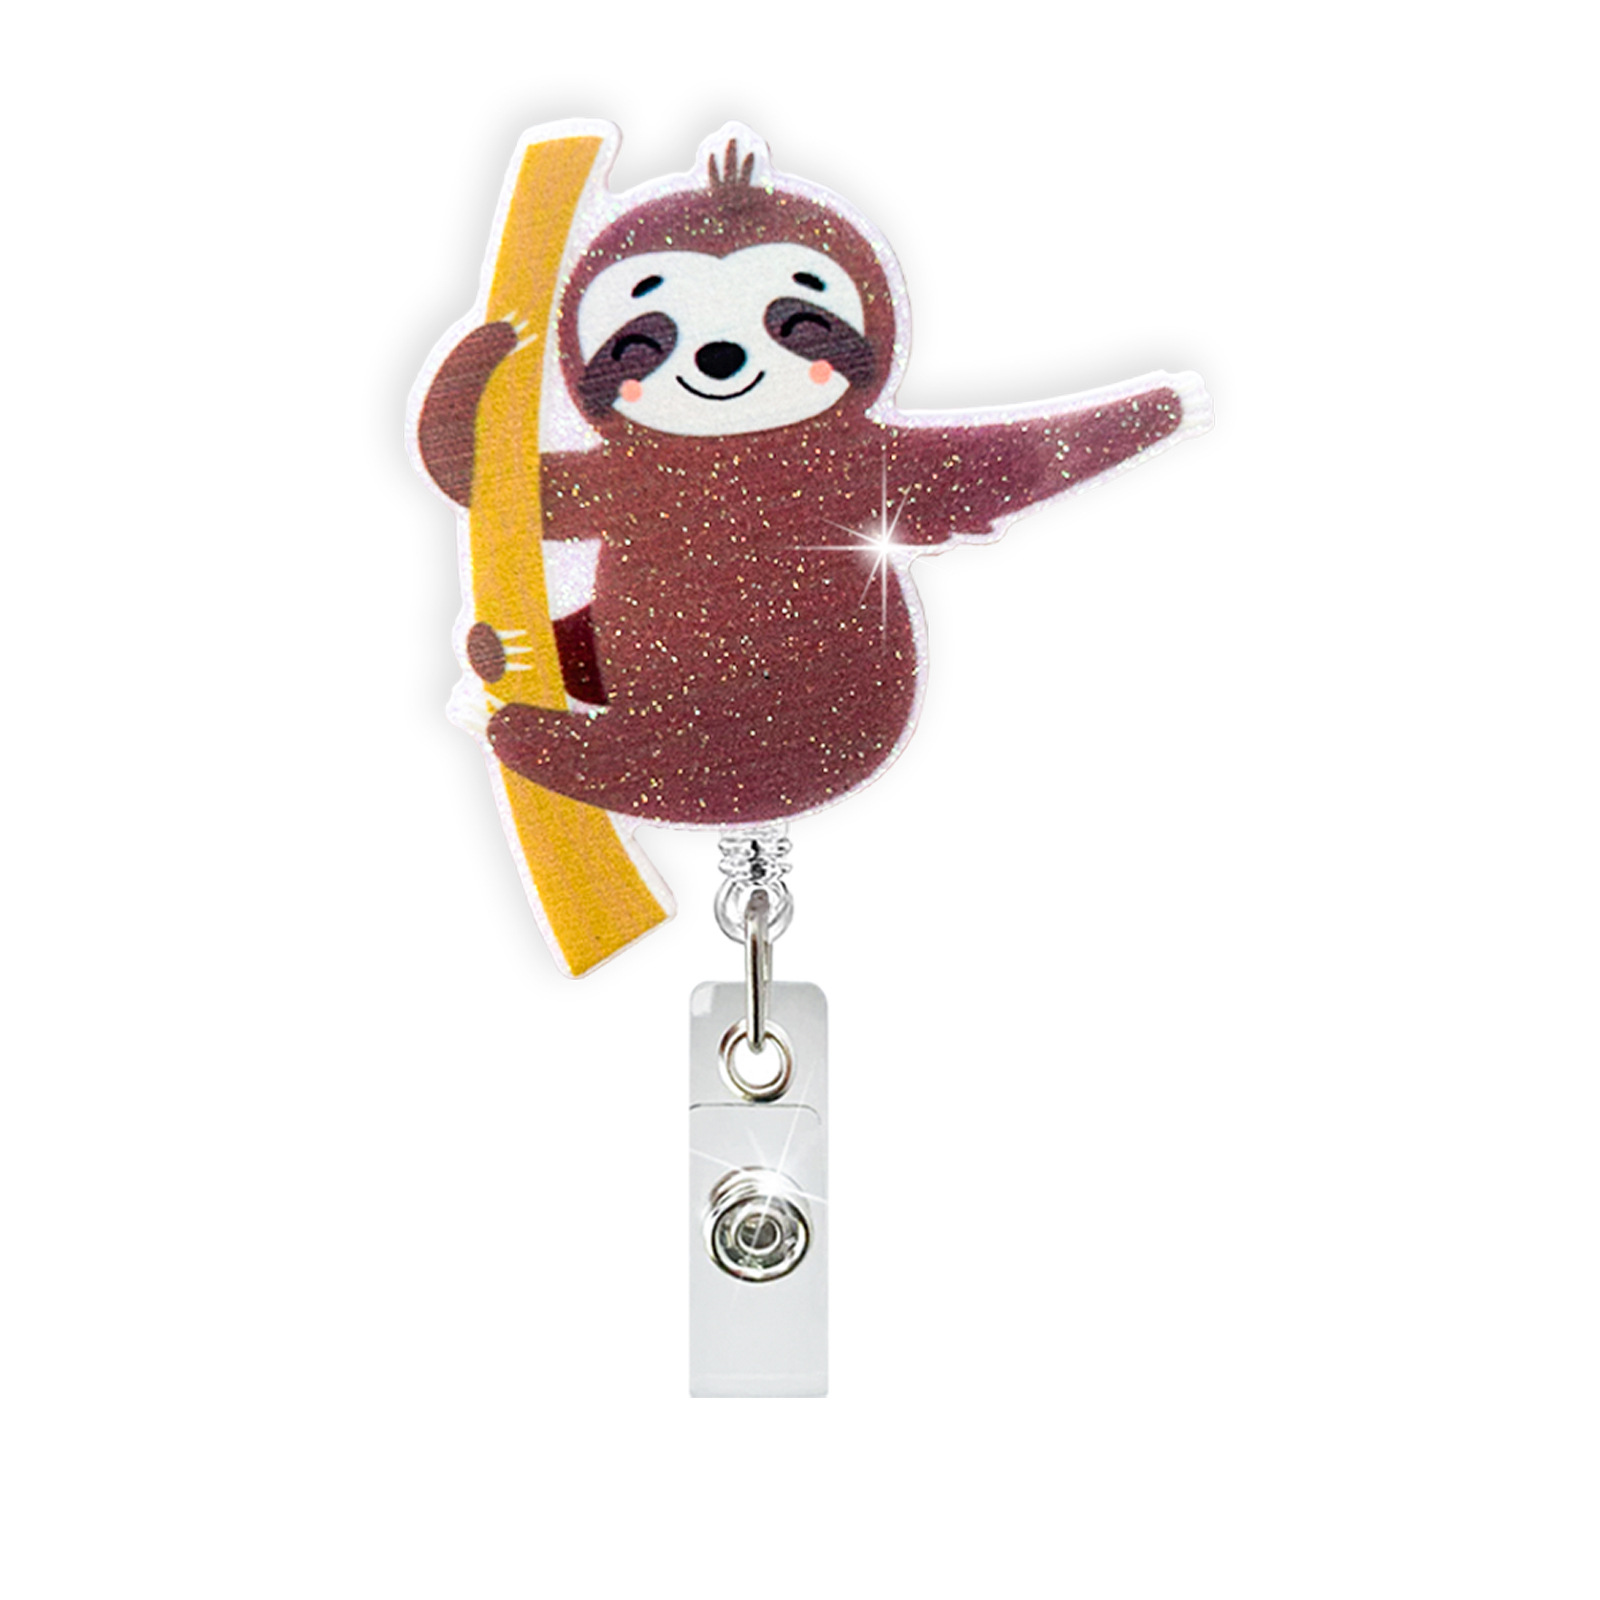 Sloth Badge KeyChain Desk Accessories Dractable Pull Cartoon ID Badges Holder With Clip Office Supplies